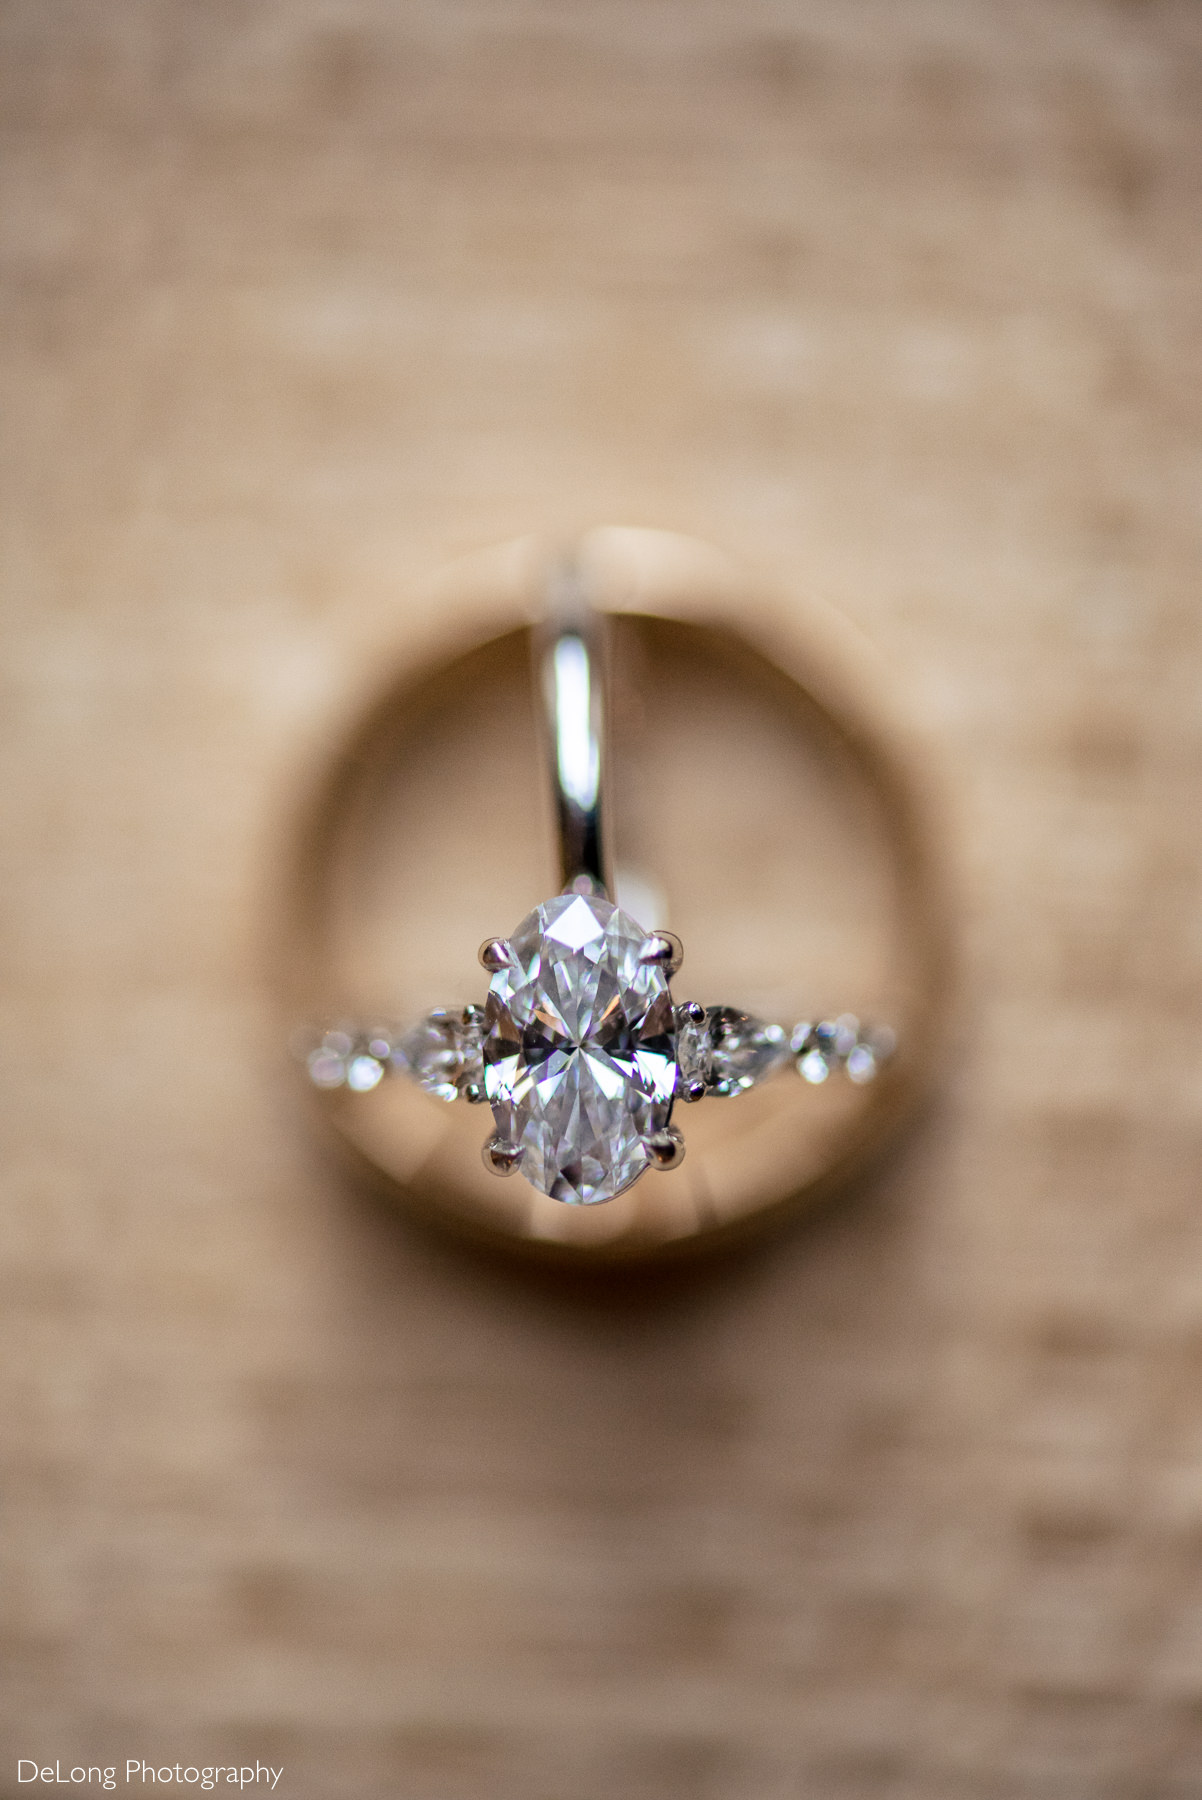 Top down view of an oval engagement ring standing up inside two wedding bands by Charlotte wedding photographers DeLong Photography